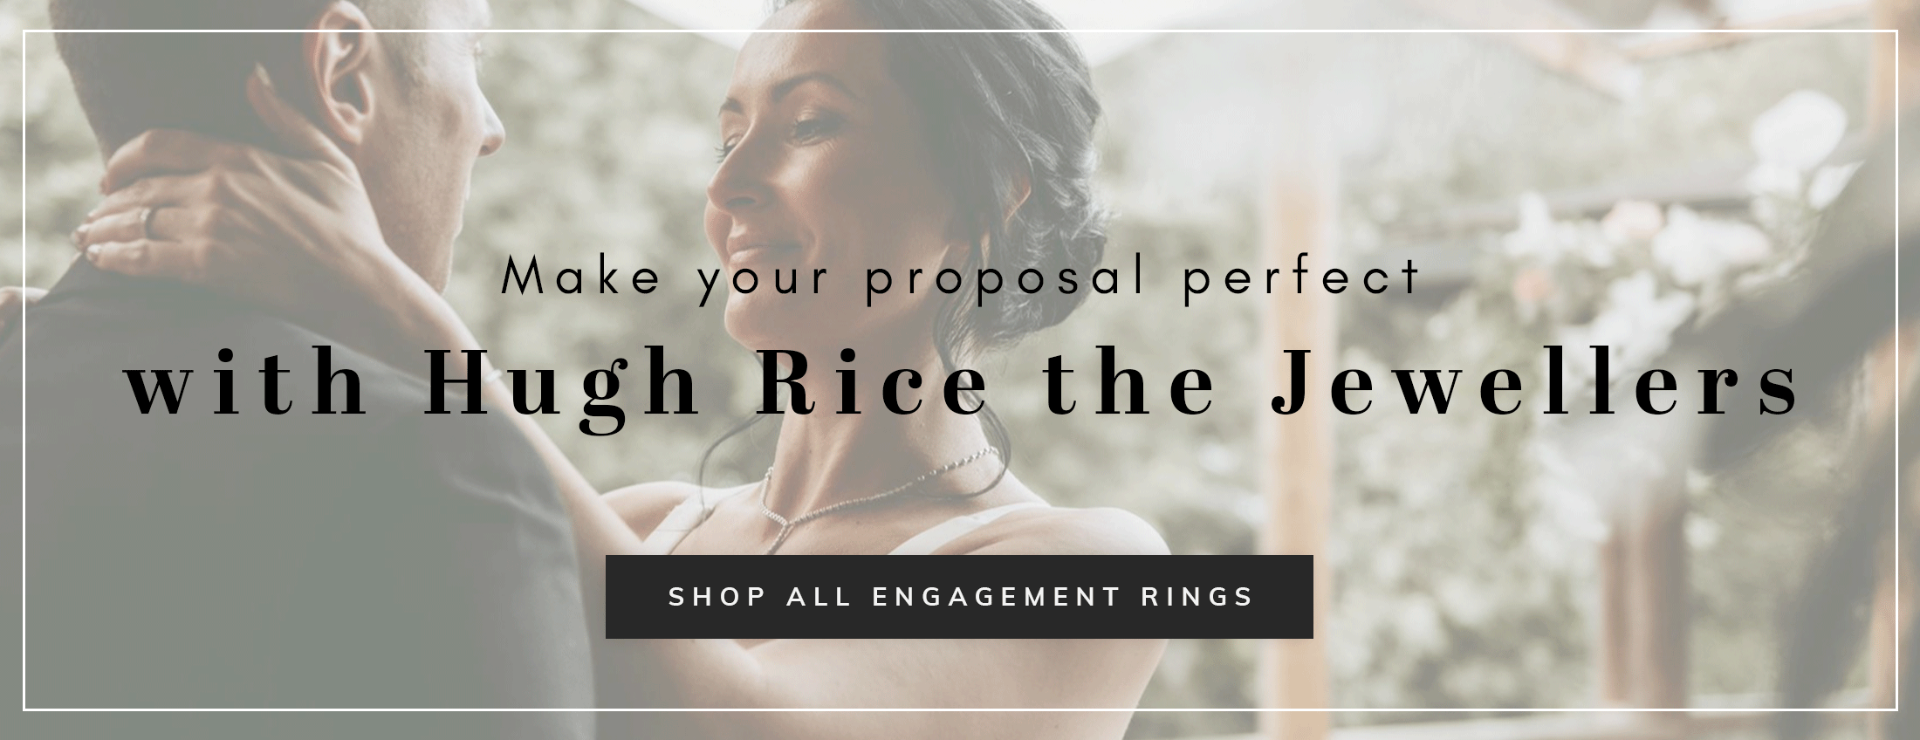 A man and a woman dancing with the words Make your proposal perfect with Hugh Rice the Jewellers overlaying them, with a button that reads Shop all engagement rings